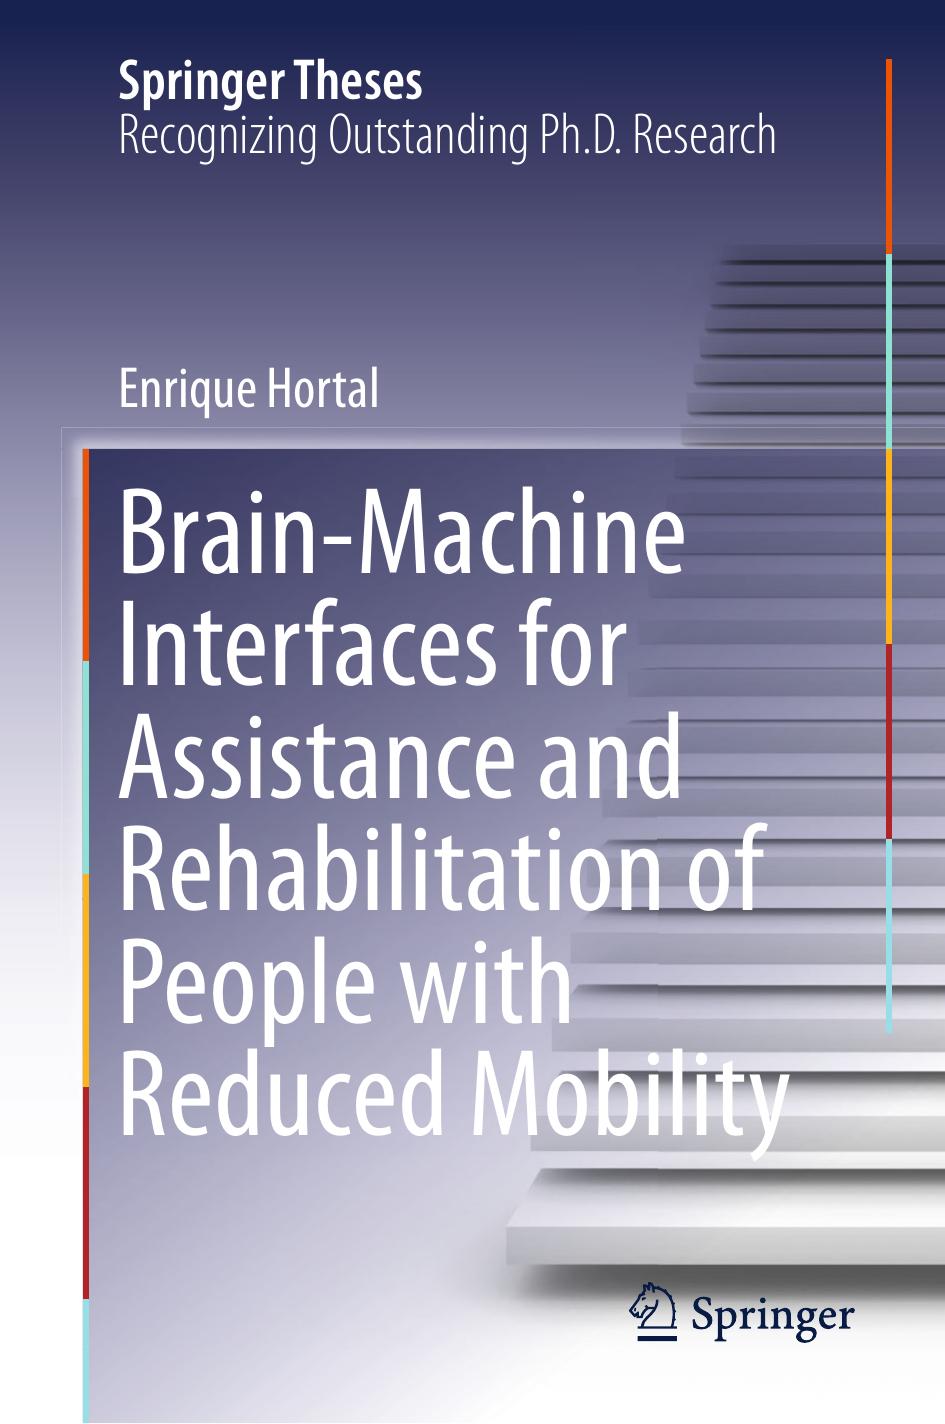 Brain-Machine Interfaces for Assistance and Rehabilitation of People with Reduced Mobility by Enrique Hortal